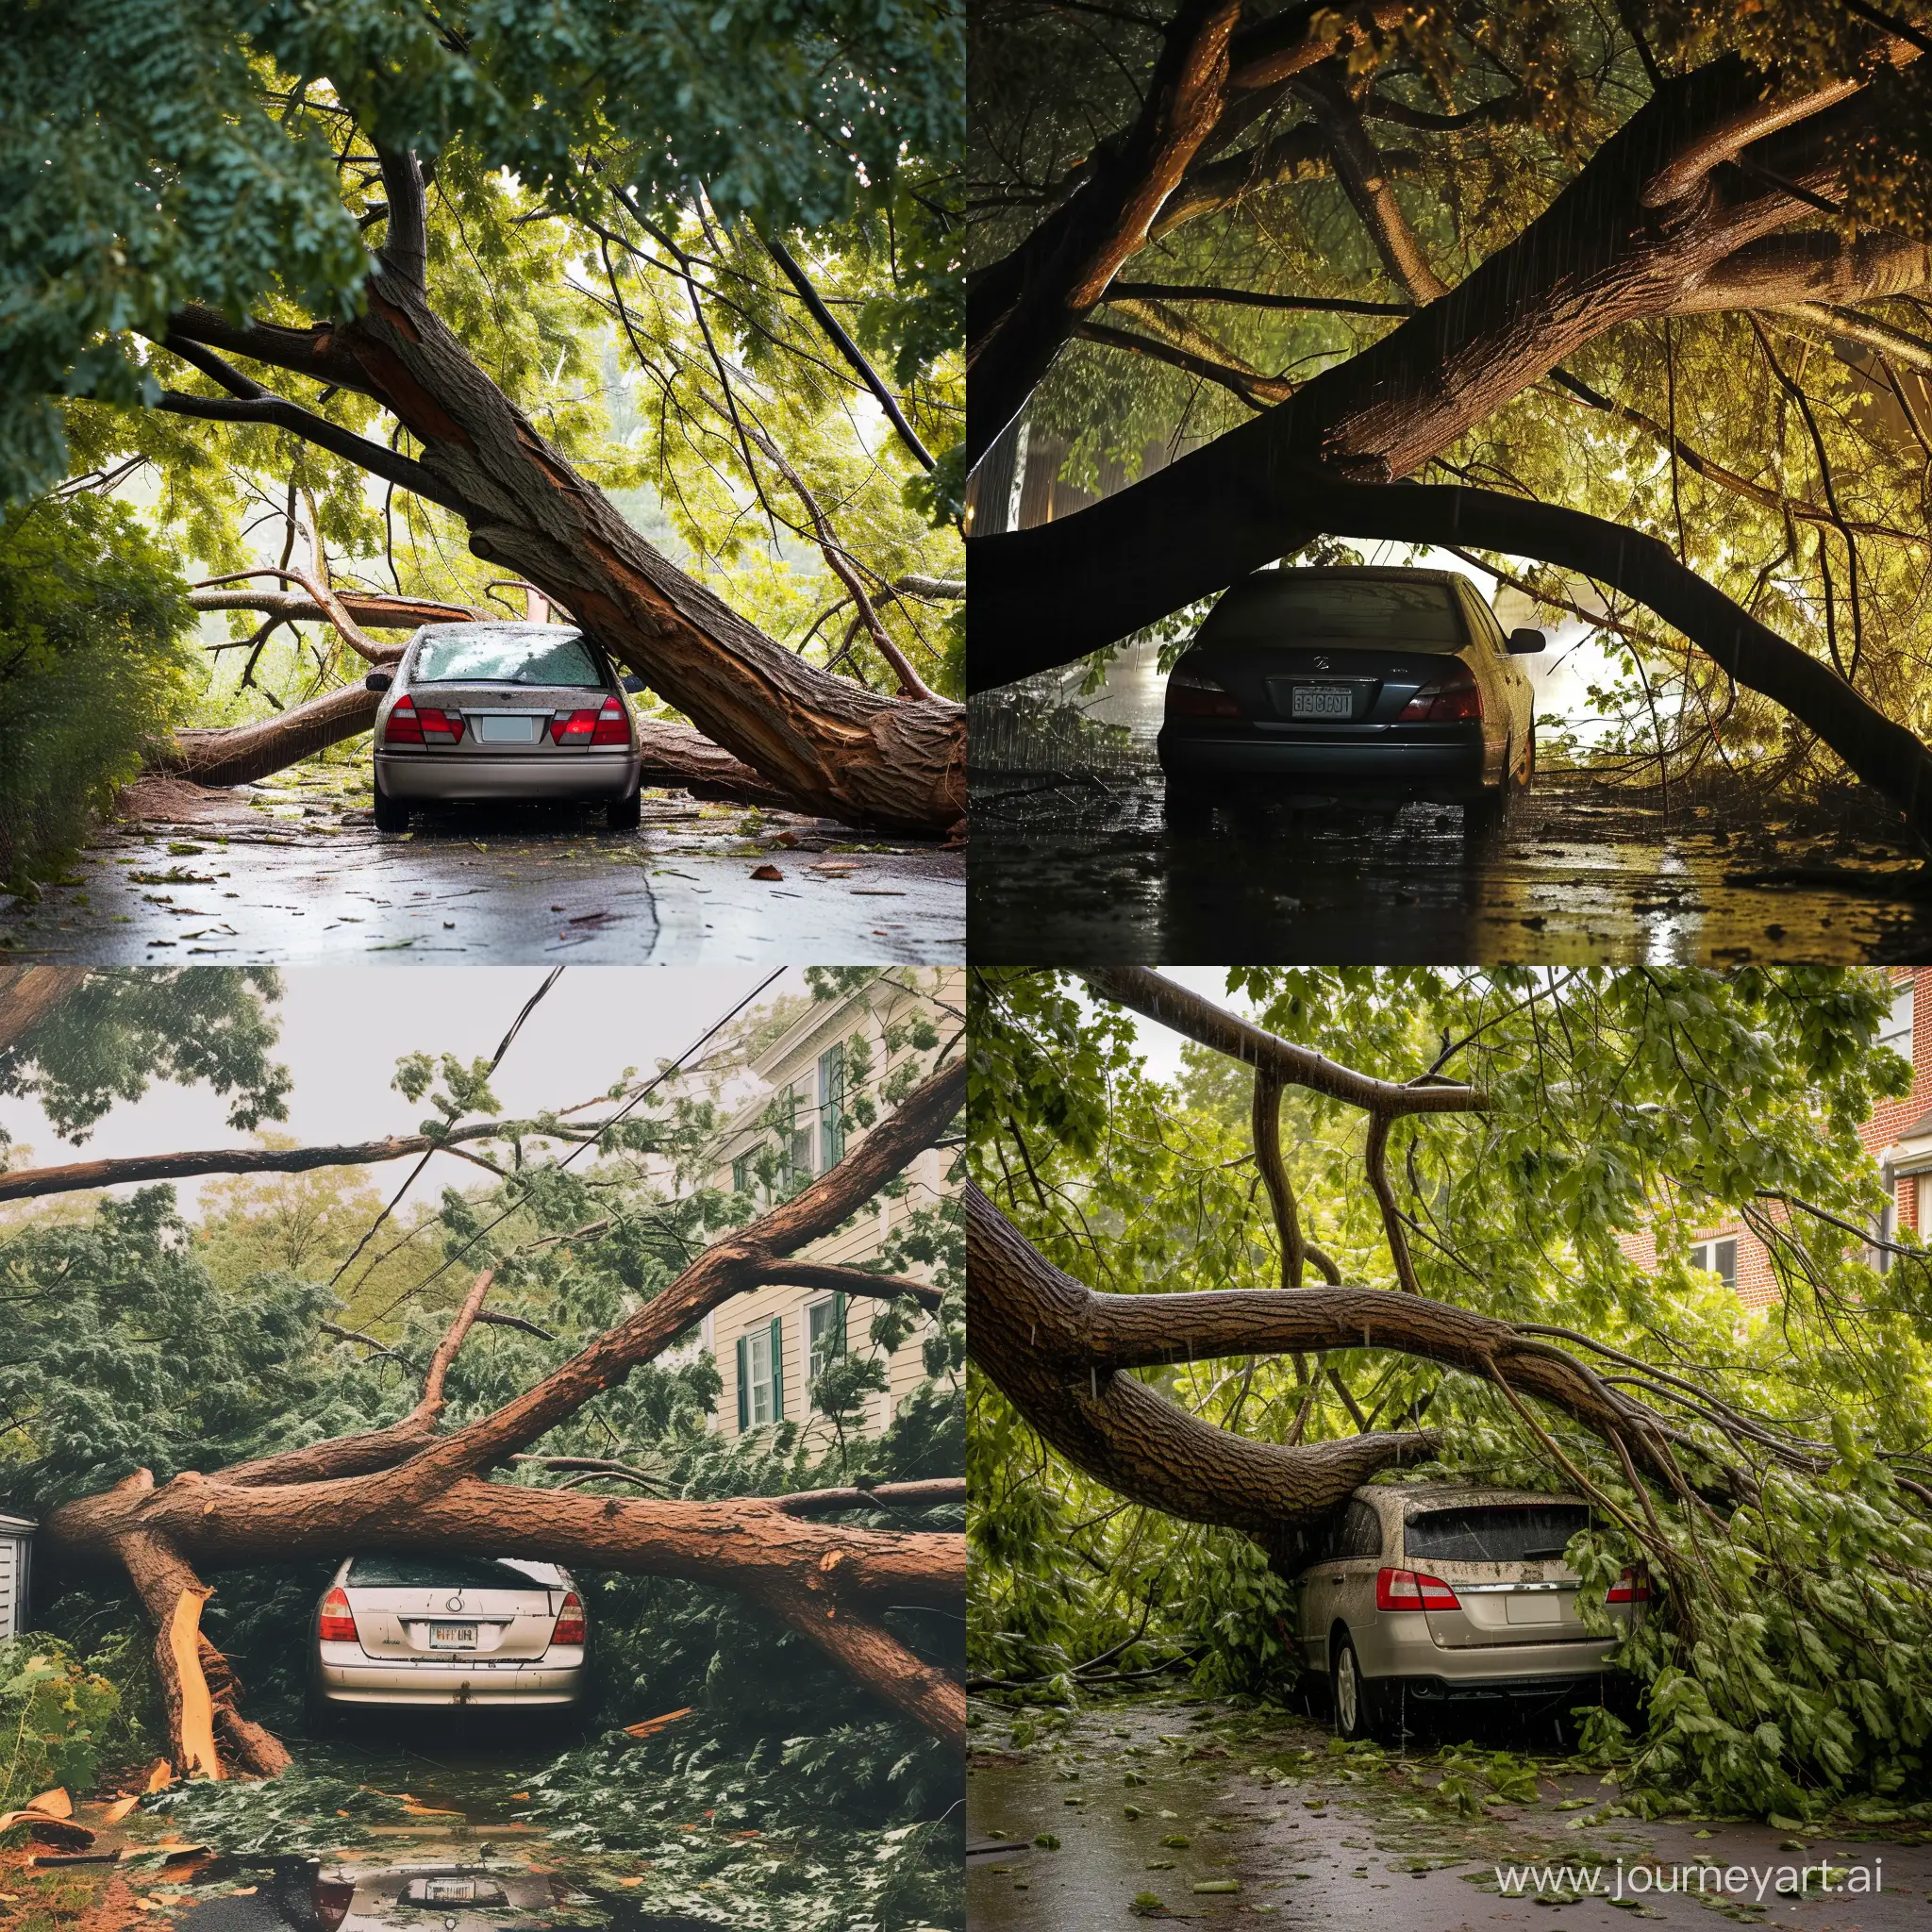 car under the fallen tree in rainy weather, car is not damaged and tree is not touching the car, tree is bent over the car